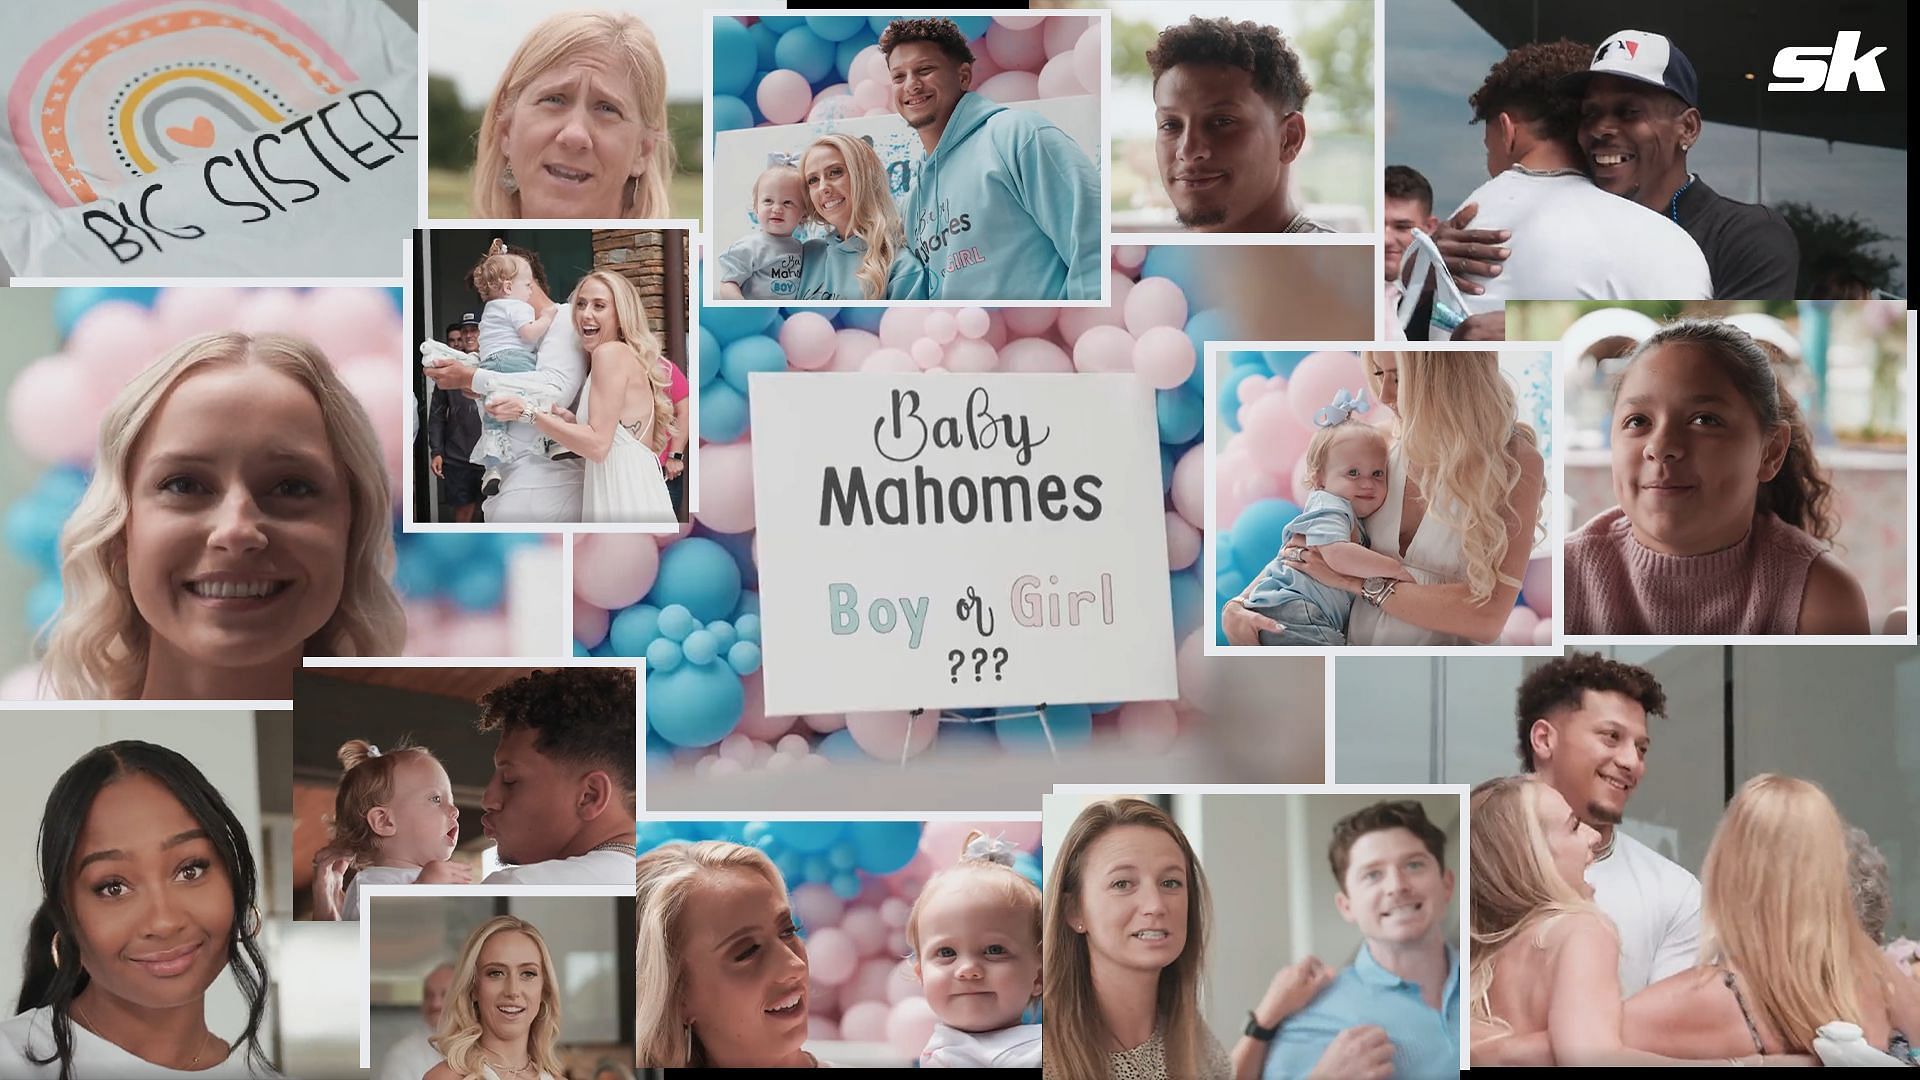 Brittany Mahomes Reveals When She and Patrick Mahomes Conceived Baby Son